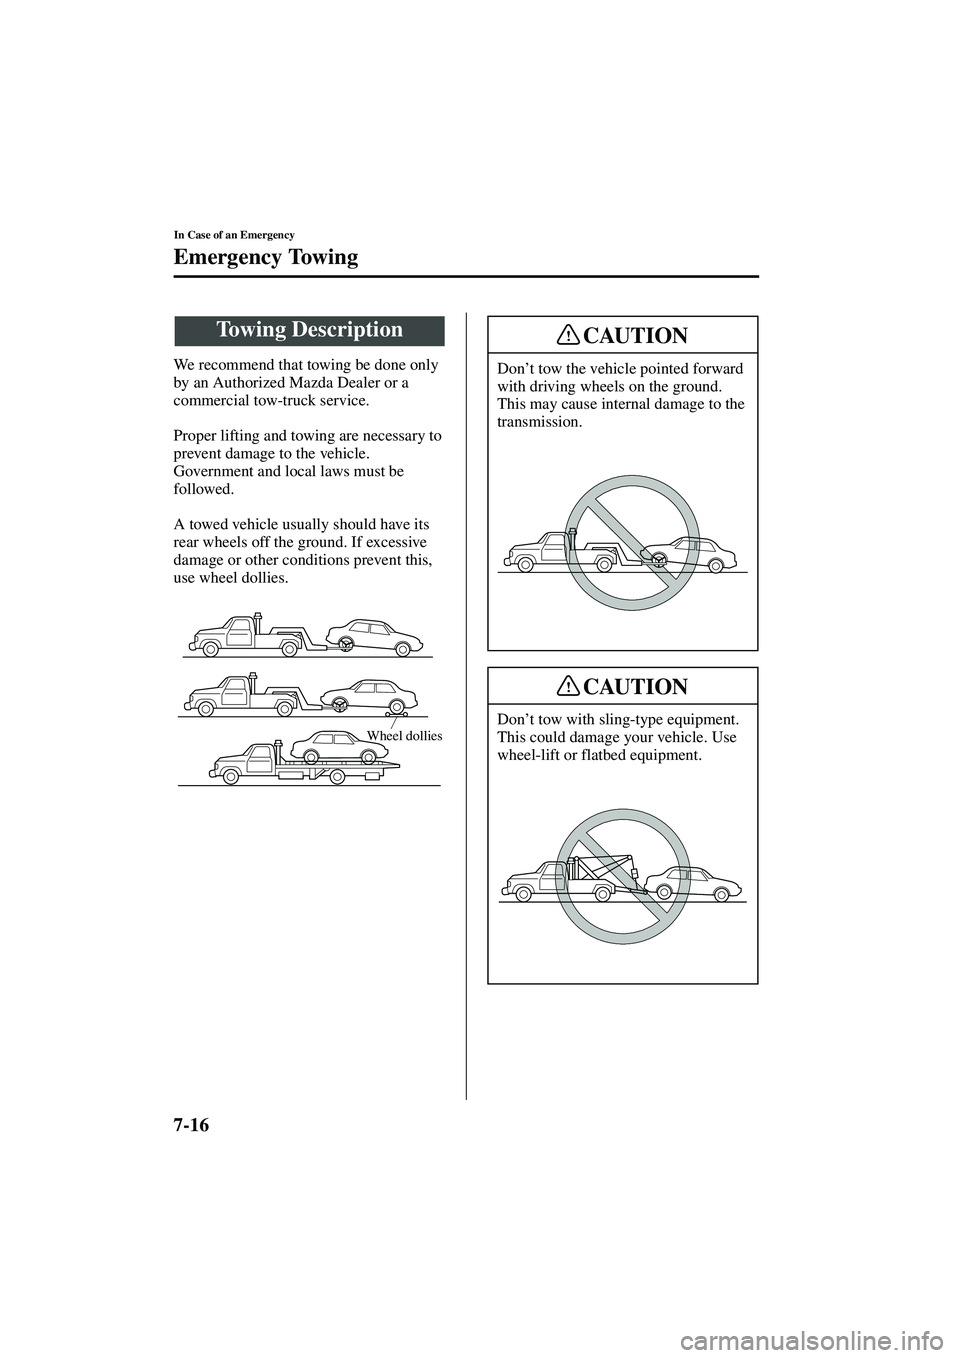 MAZDA MODEL MX-5 MIATA 2004 User Guide 7-16
In Case of an Emergency
Form No. 8S15-EA-03G
Emergency Towing
We recommend that towing be done only 
by an Authorized Mazda Dealer or a 
commercial tow-truck service.
Proper lifting and towing ar